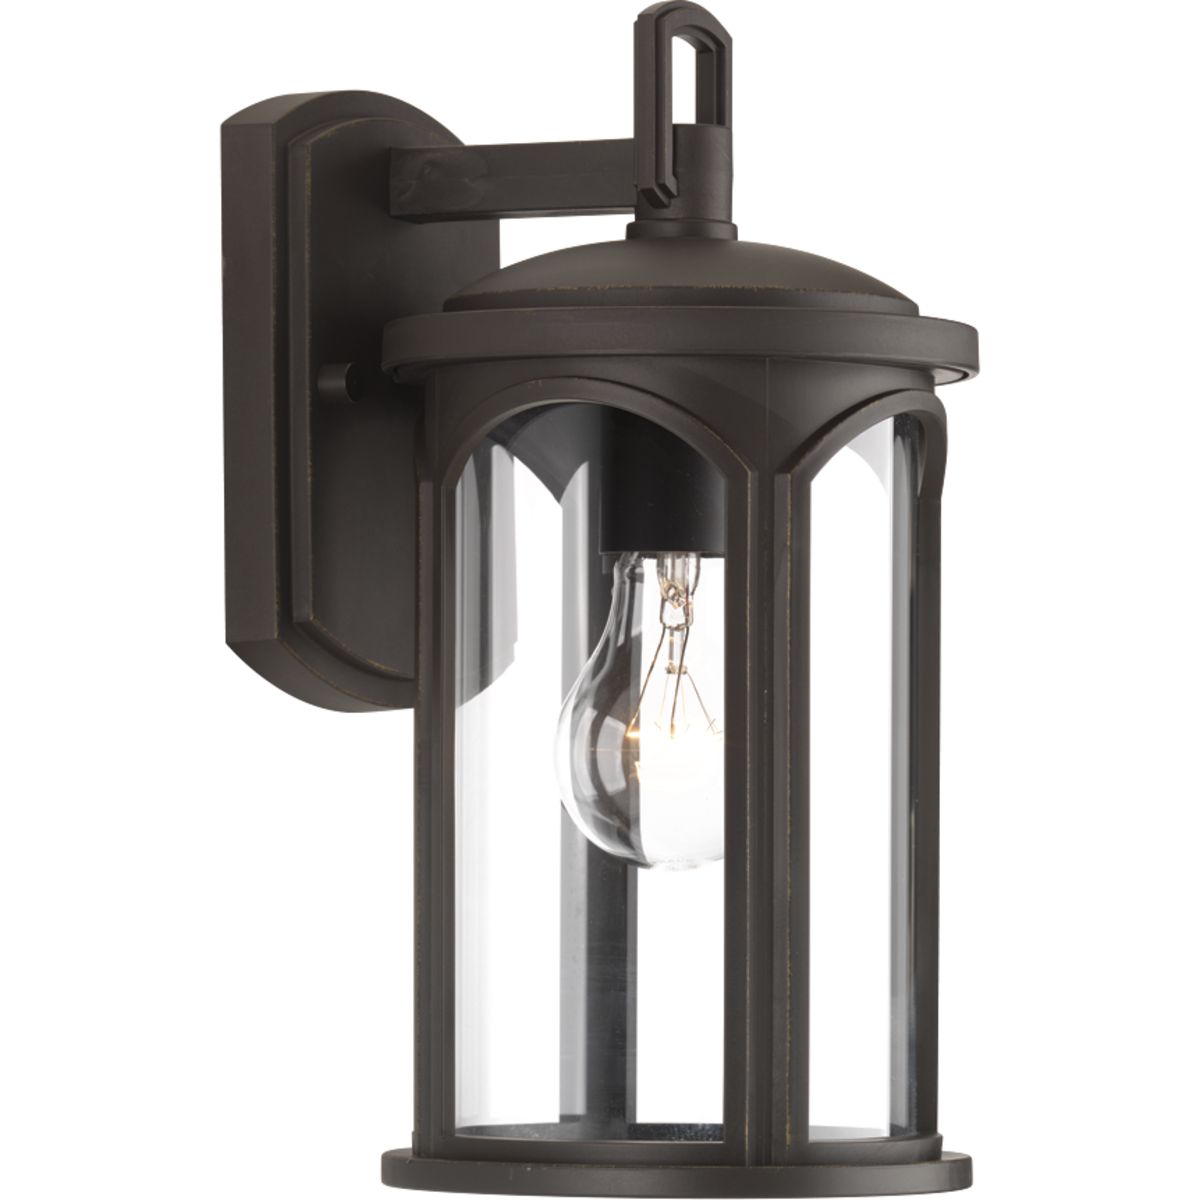 Engineered composite polymers are used to create the distinctive Gables lanterns. Developed to withstand a broad range of environmental conditions, the corrosion-resistant housing delivers beautiful lighting and reliability. A clear glass globe enhances the classic design.